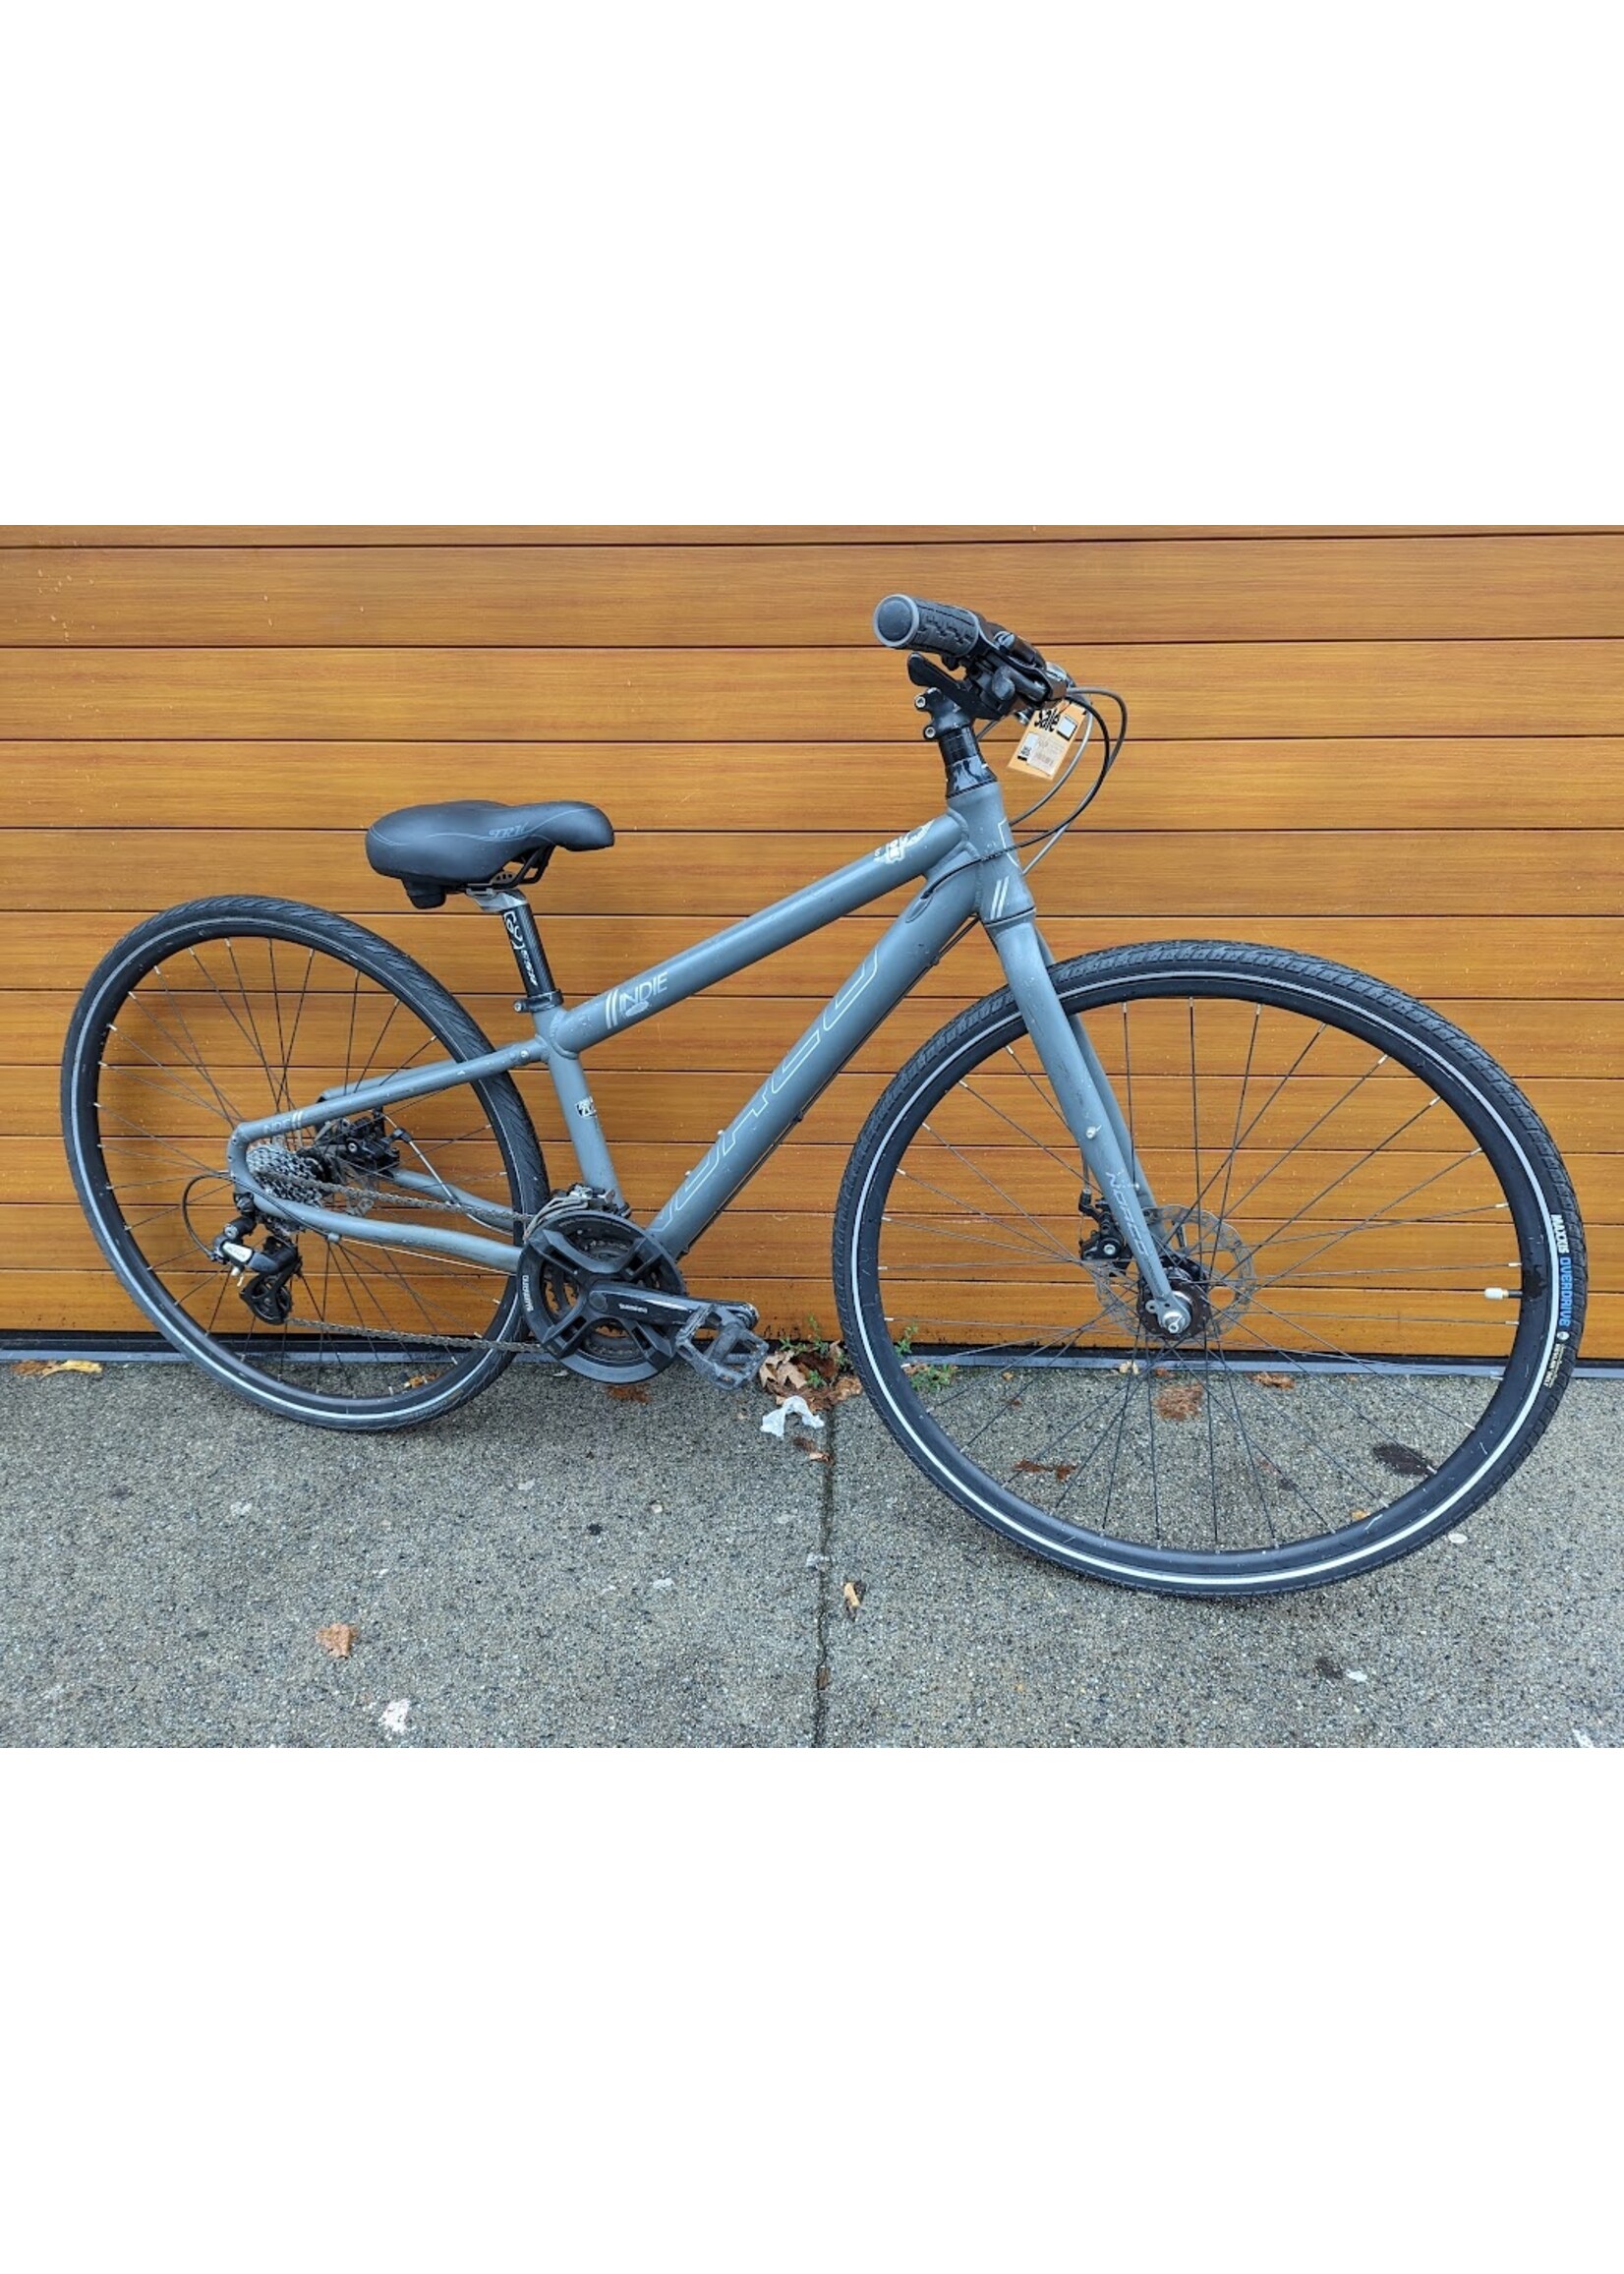 USED NORCO Indie, 13 Inch, XS grey